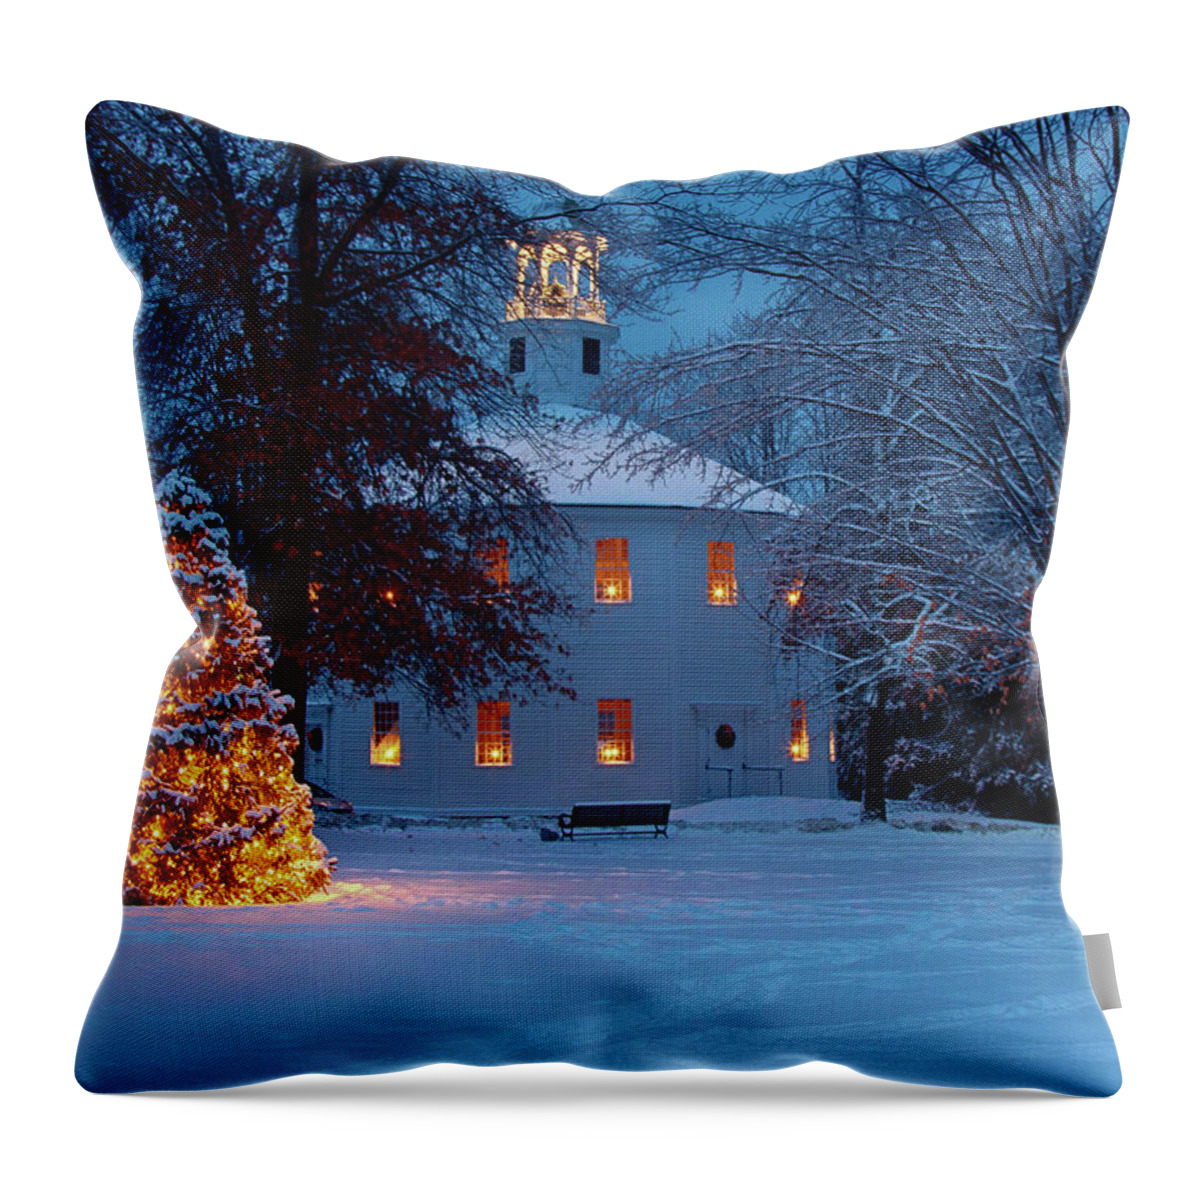 Round Church Throw Pillow featuring the photograph Richmond Vermont round church at Christmas by Jeff Folger